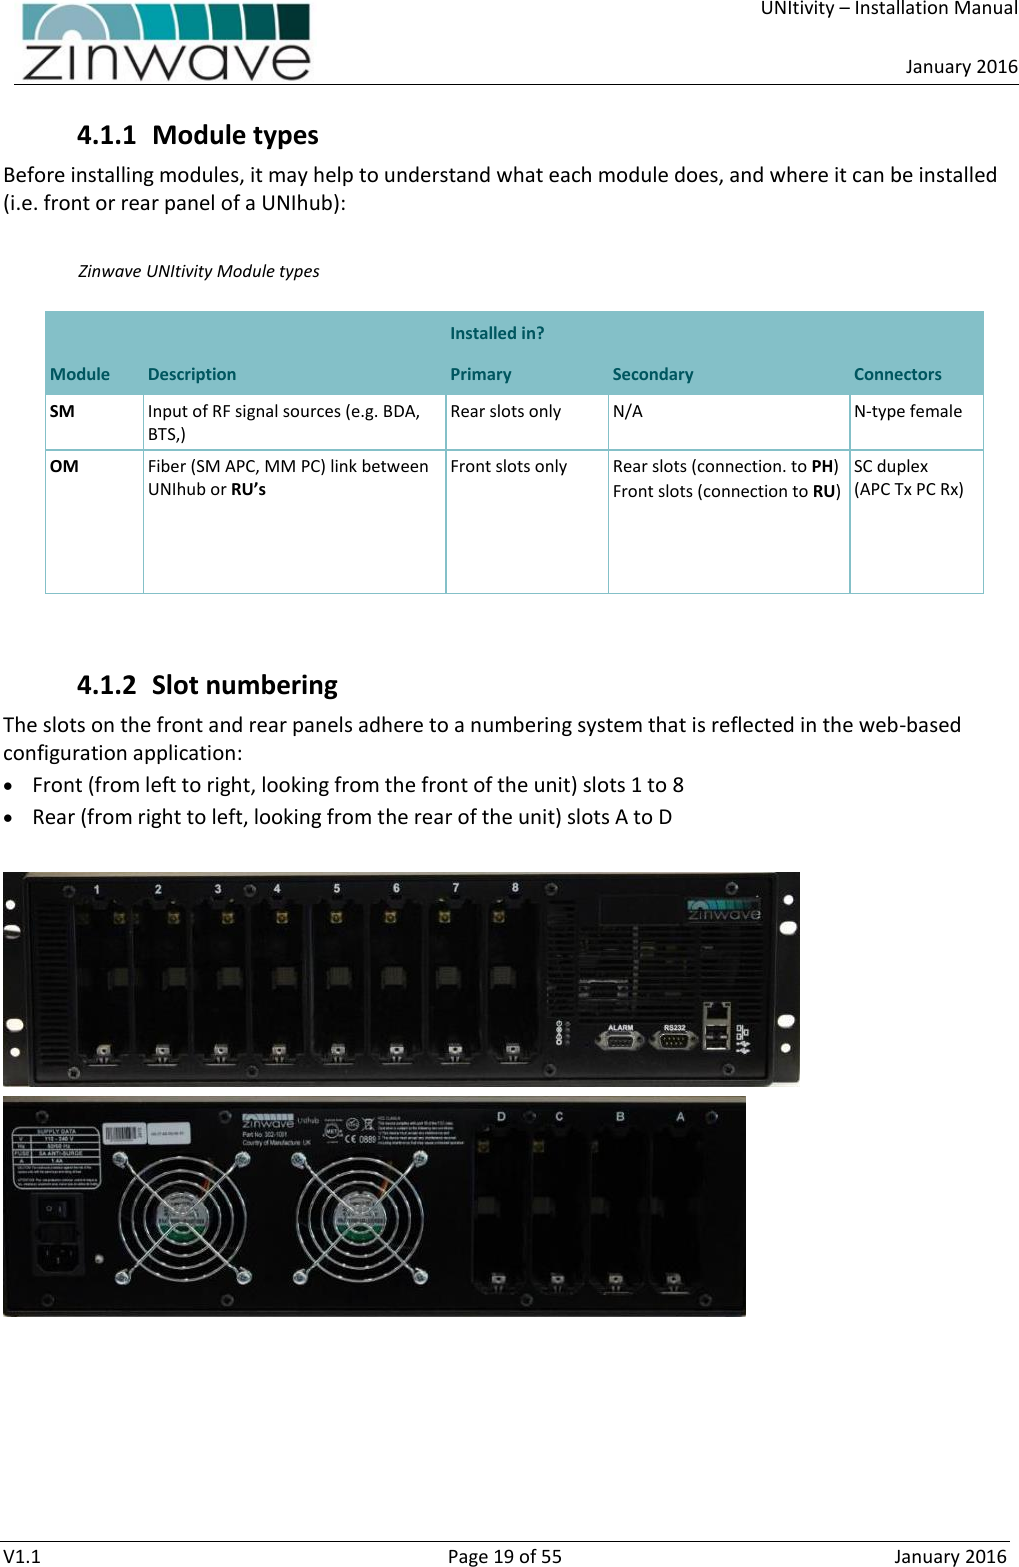     UNItivity – Installation Manual      January 2016  V1.1  Page 19 of 55  January 2016 4.1.1 Module types Before installing modules, it may help to understand what each module does, and where it can be installed (i.e. front or rear panel of a UNIhub):   Table 21 Zinwave UNItivity Module types  Table 21  Module  Description Installed in? Connectors Primary Secondary SM Input of RF signal sources (e.g. BDA, BTS,)  Rear slots only N/A N-type female OM Fiber (SM APC, MM PC) link between UNIhub or RU’s Front slots only Rear slots (connection. to PH) Front slots (connection to RU) SC duplex  (APC Tx PC Rx)     4.1.2 Slot numbering The slots on the front and rear panels adhere to a numbering system that is reflected in the web-based configuration application:  Front (from left to right, looking from the front of the unit) slots 1 to 8  Rear (from right to left, looking from the rear of the unit) slots A to D       